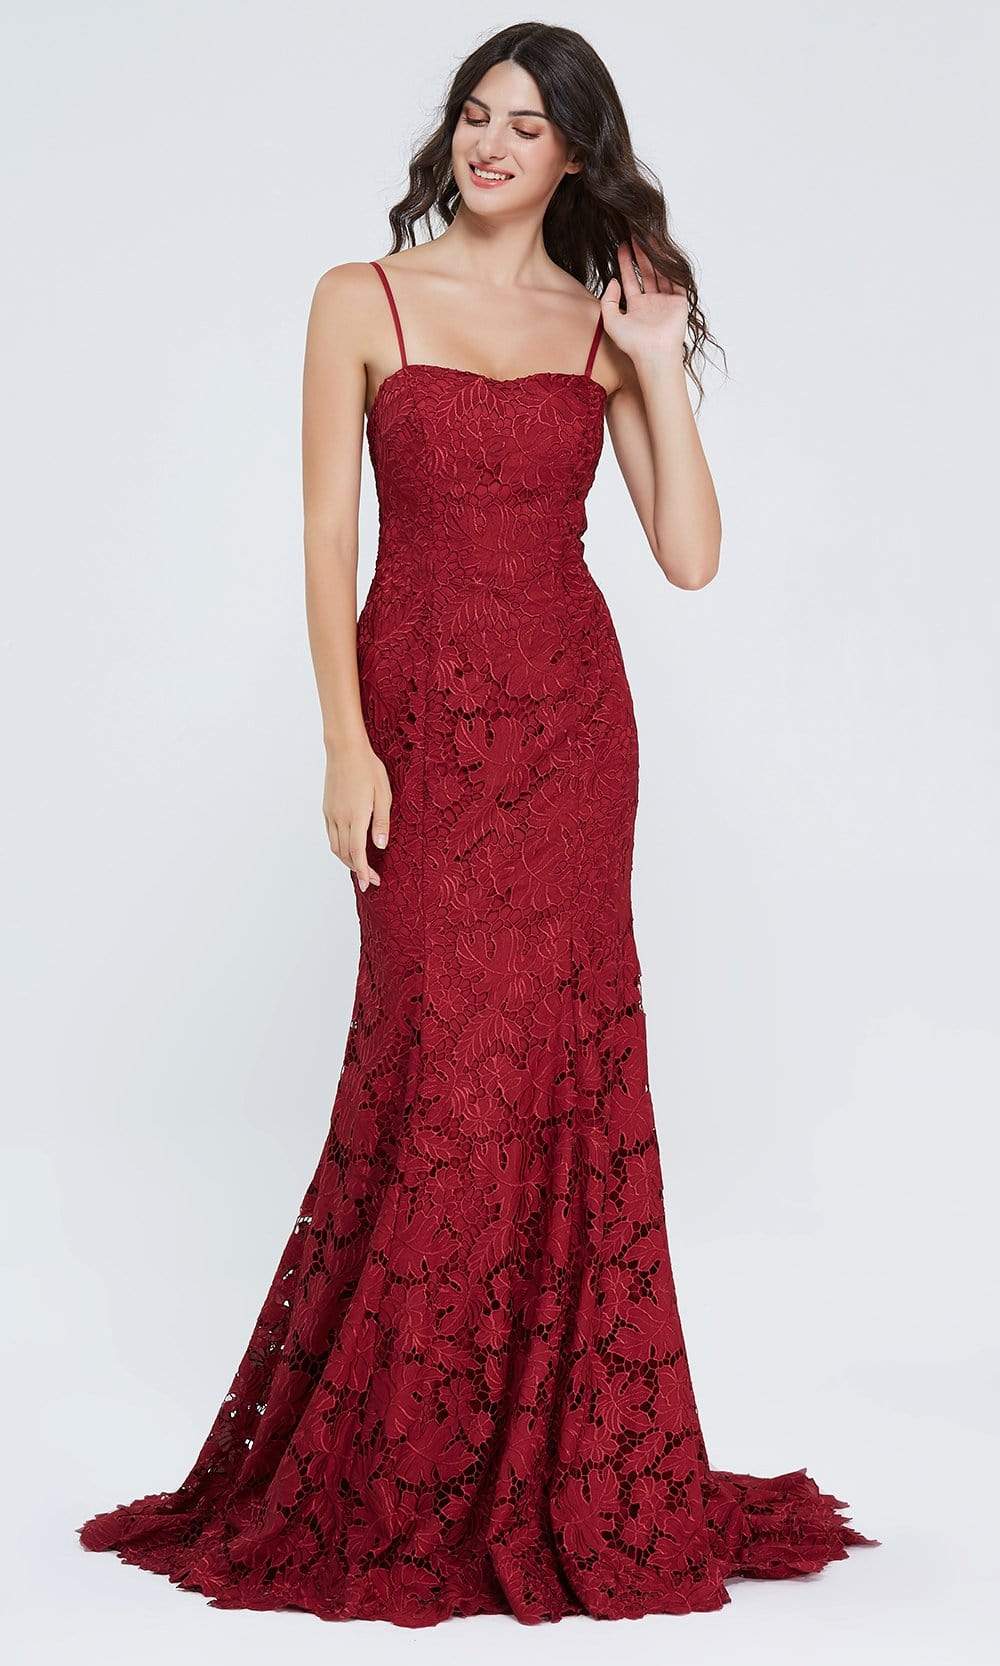 Image of J'Adore Dresses - J20021 Embroidered Sweetheart Fitted Dress